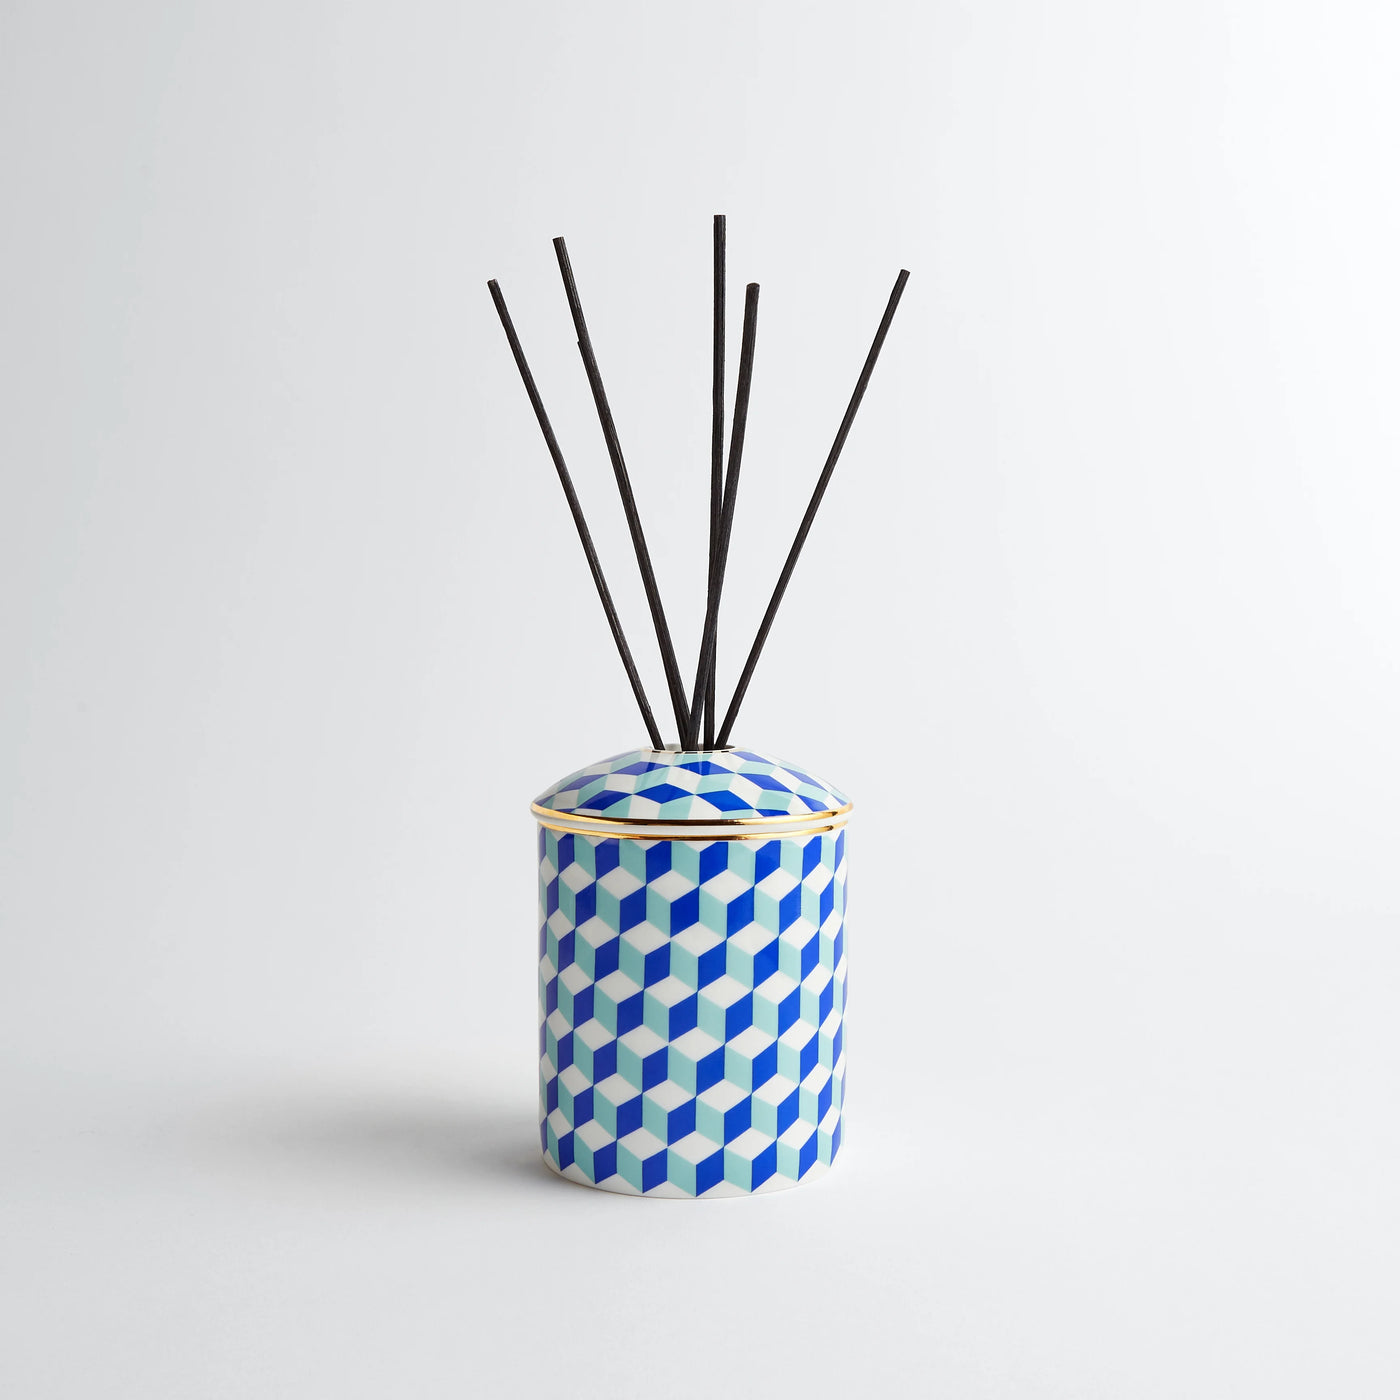 Maison Splendid fine bone china diffuser in bright blue geometric print with number seven fragrance musky scent